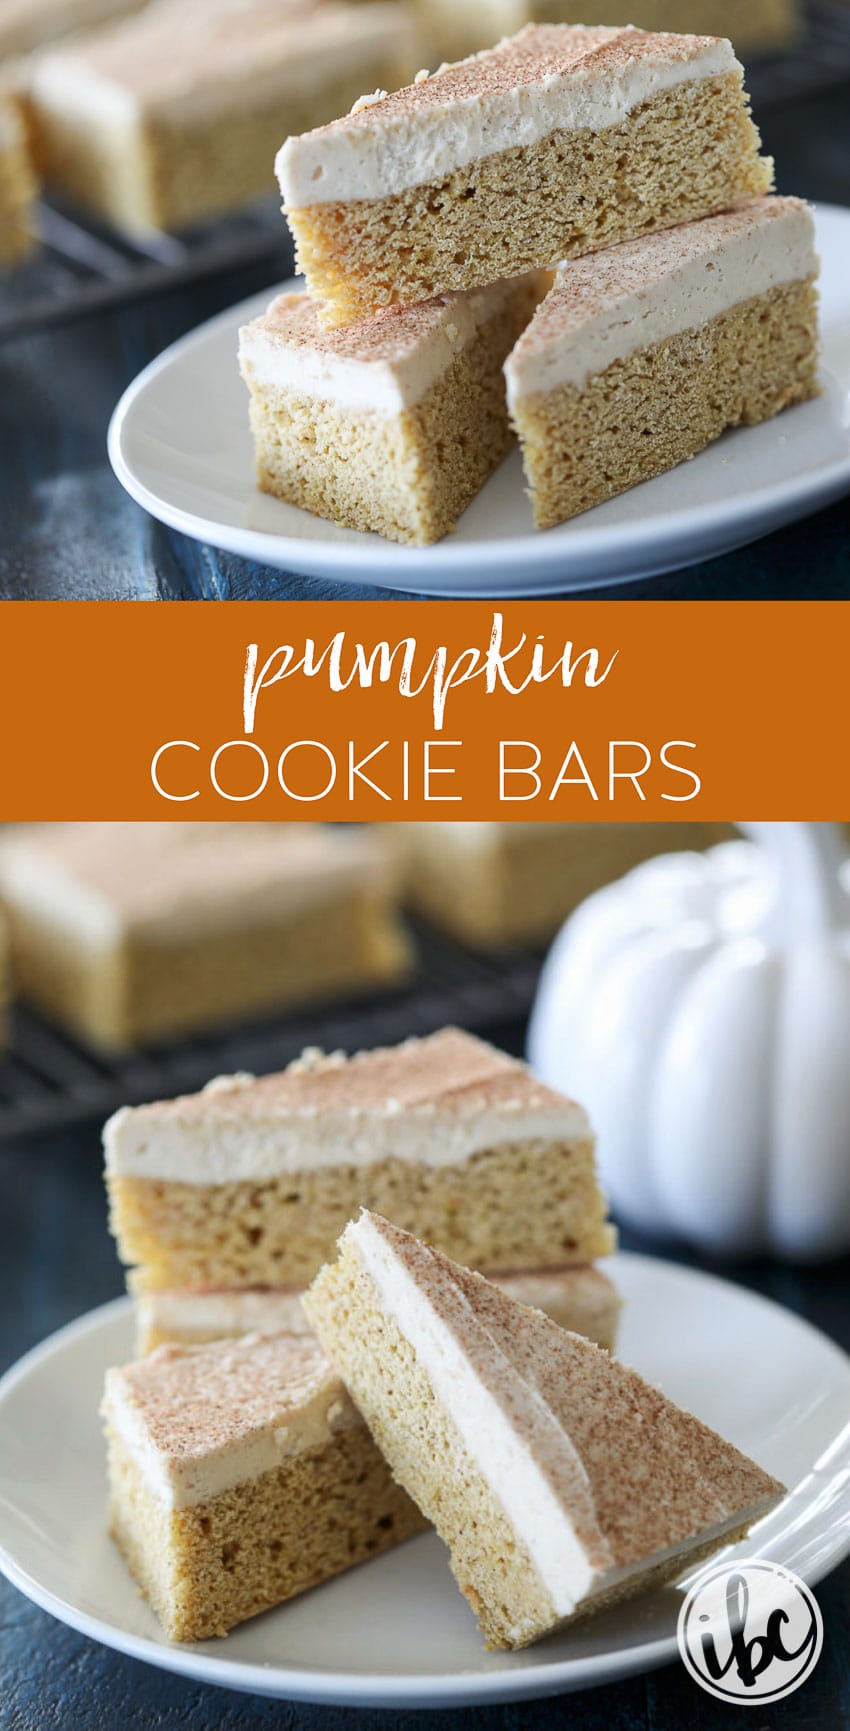 These Pumpkin Cookies Bars are a delicious fall cookie recipe. #cookie #baking #fallbaking #pumpkin #pumpkinspice #cookie